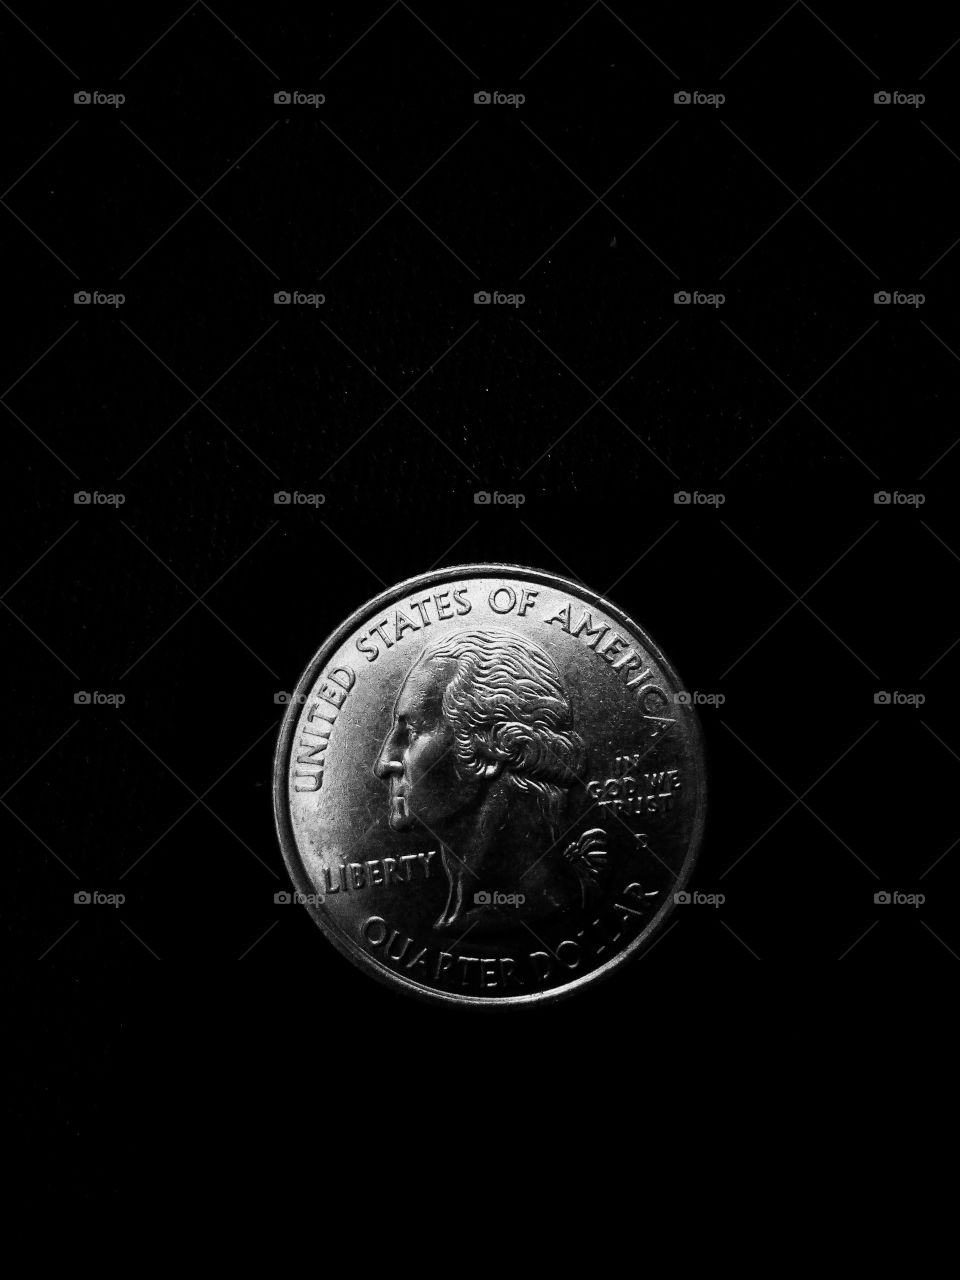 United States of America Quarter of a Dollar, in Black and White.